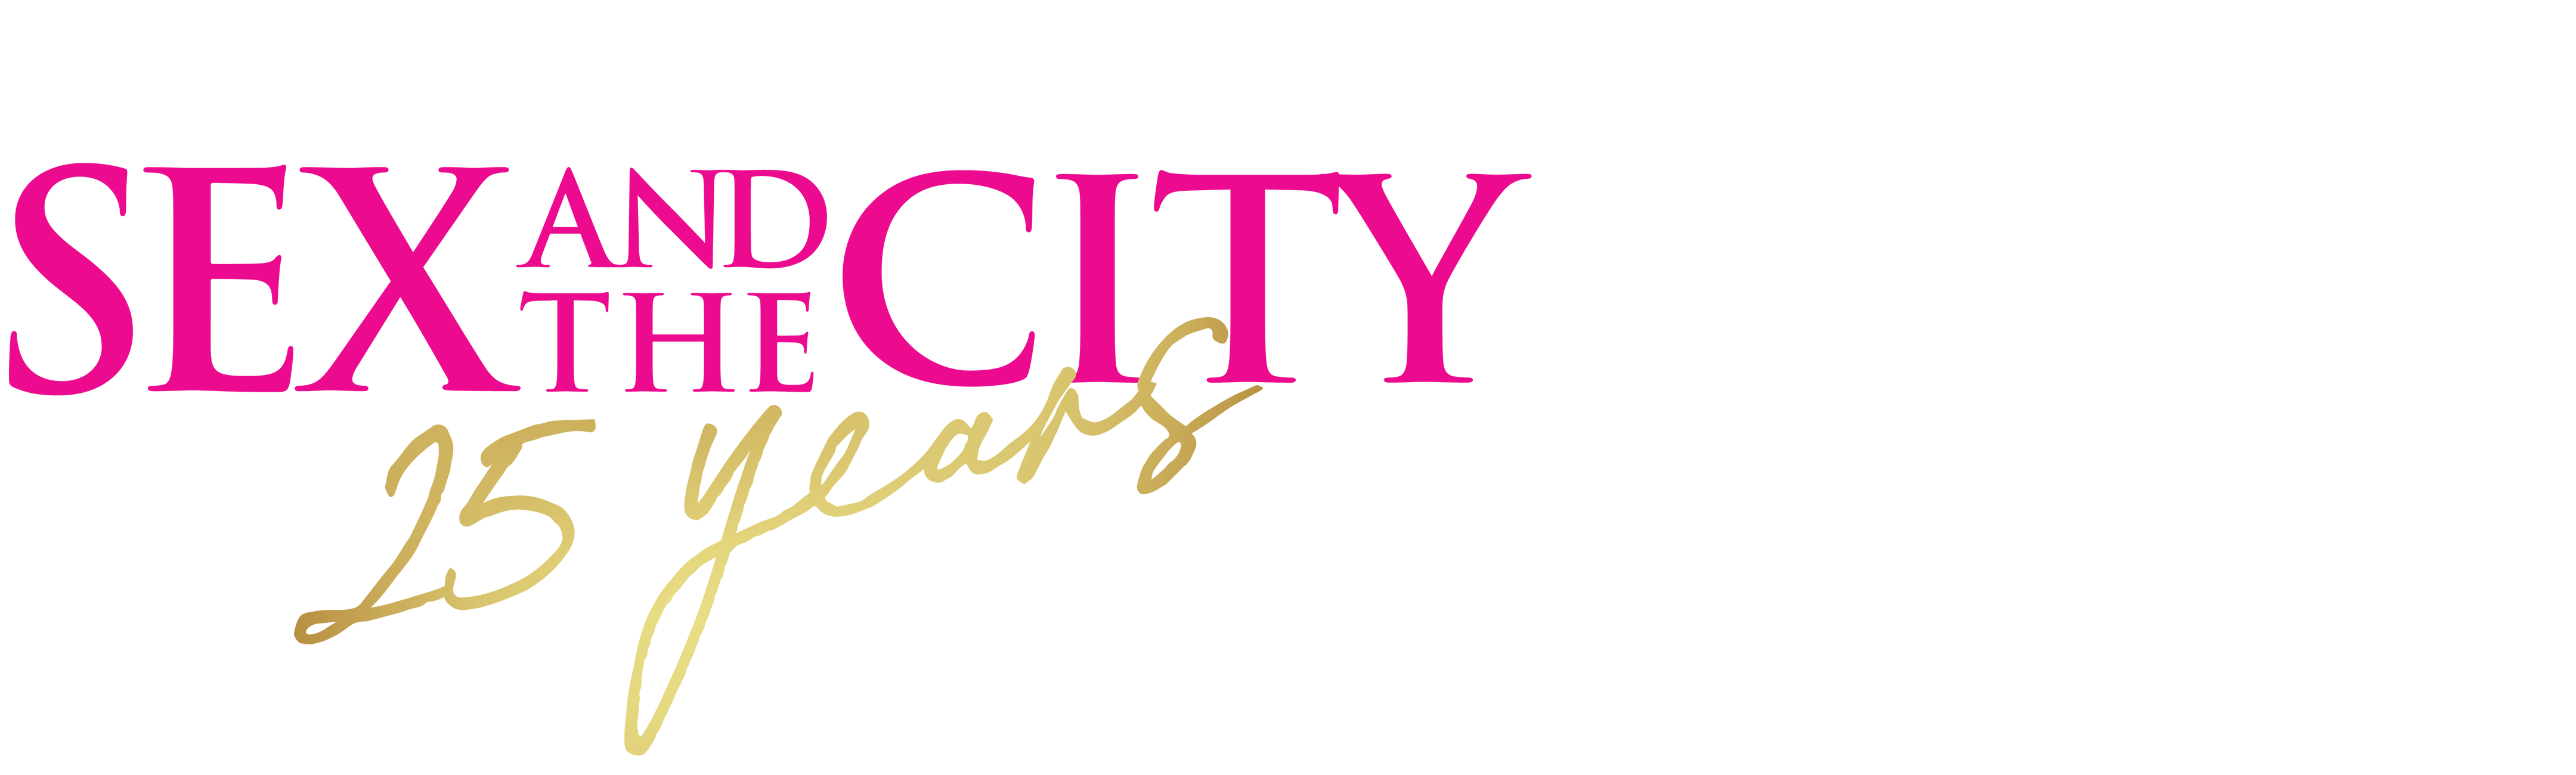 Watch Sex And The City Hbo Free S1 E1 Max